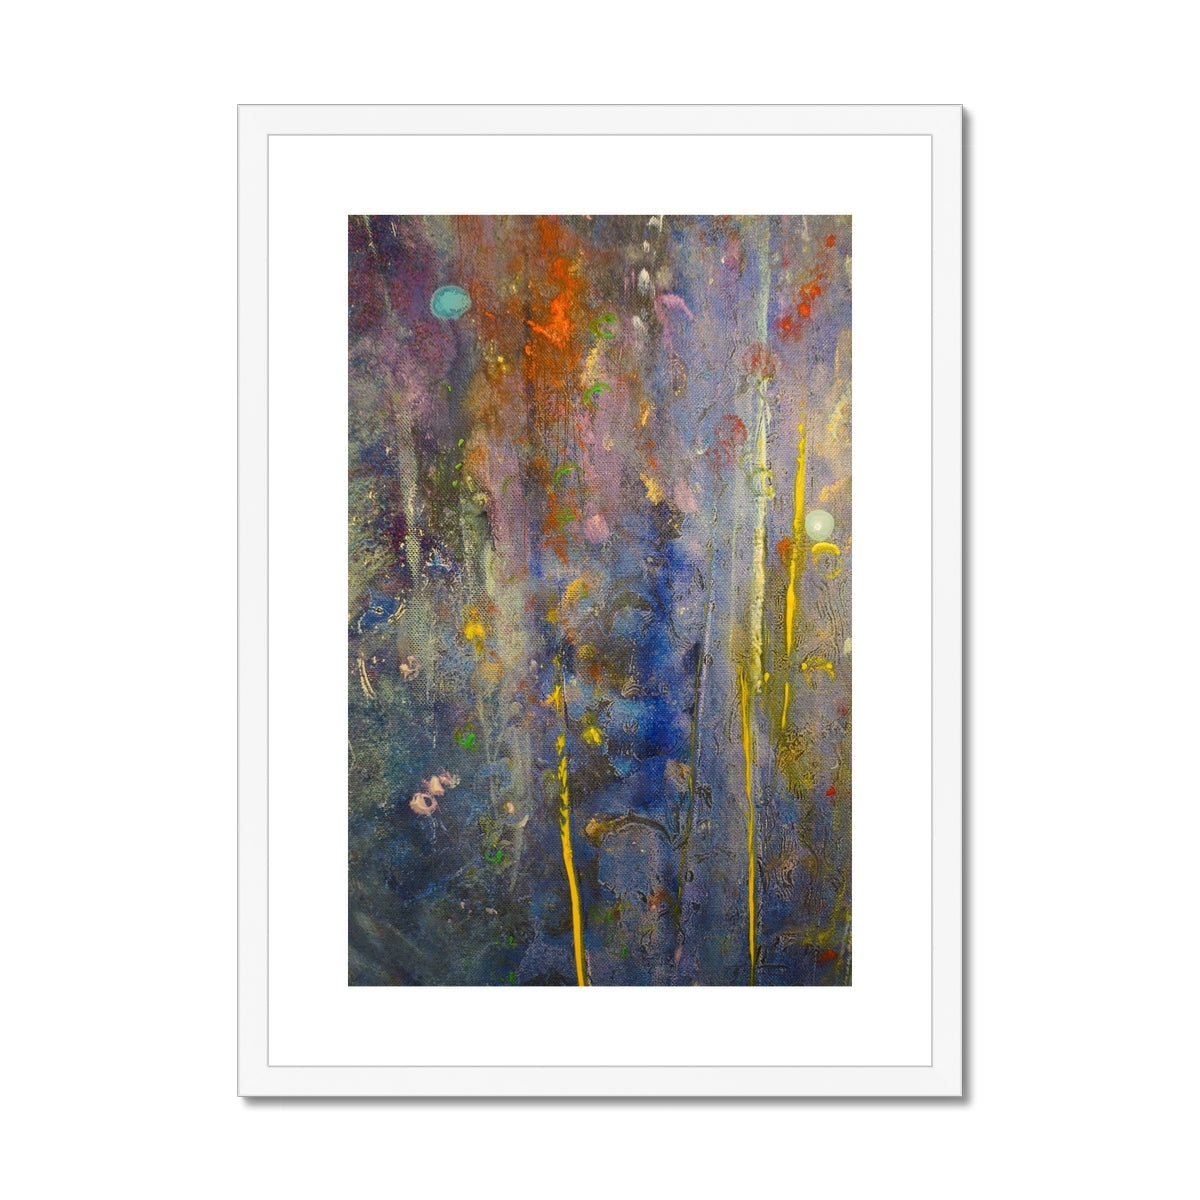 Cairngorms Waterfall Abstract Painting | Framed & Mounted Prints From Scotland-Framed & Mounted Prints-Abstract & Impressionistic Art Gallery-A2 Portrait-White Frame-Paintings, Prints, Homeware, Art Gifts From Scotland By Scottish Artist Kevin Hunter